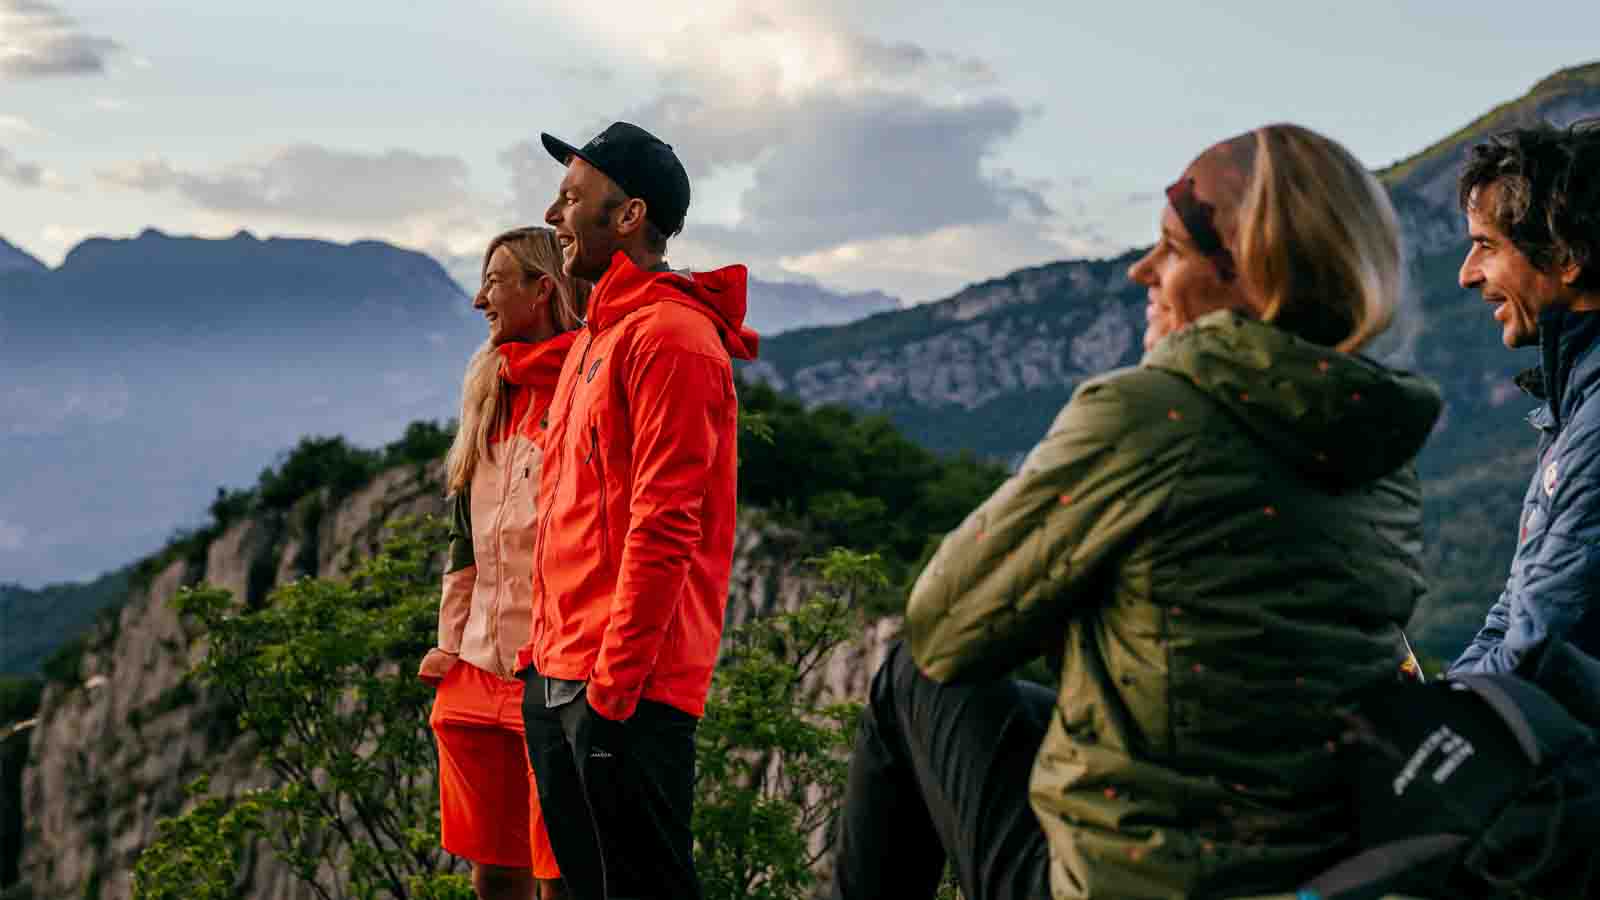 Maloja S/S 2022 Great Outdoors Preview